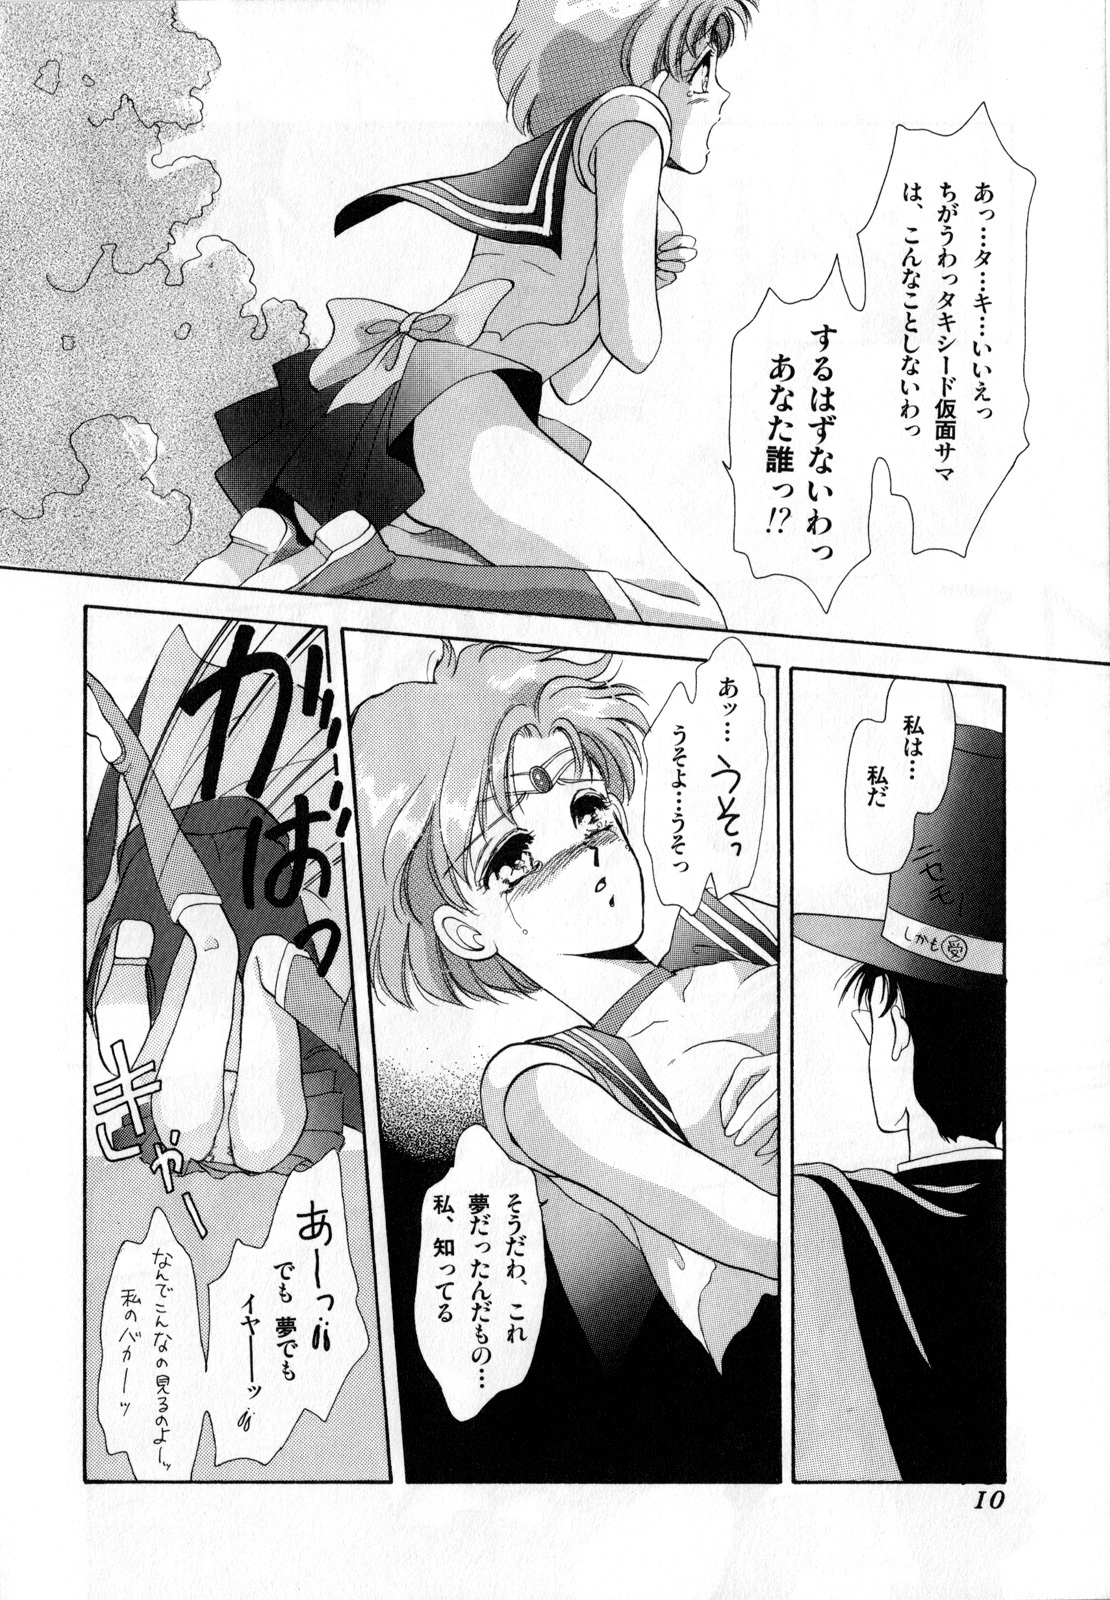 [Anthology] Lunatic Party 1 (Sailor Moon) page 11 full